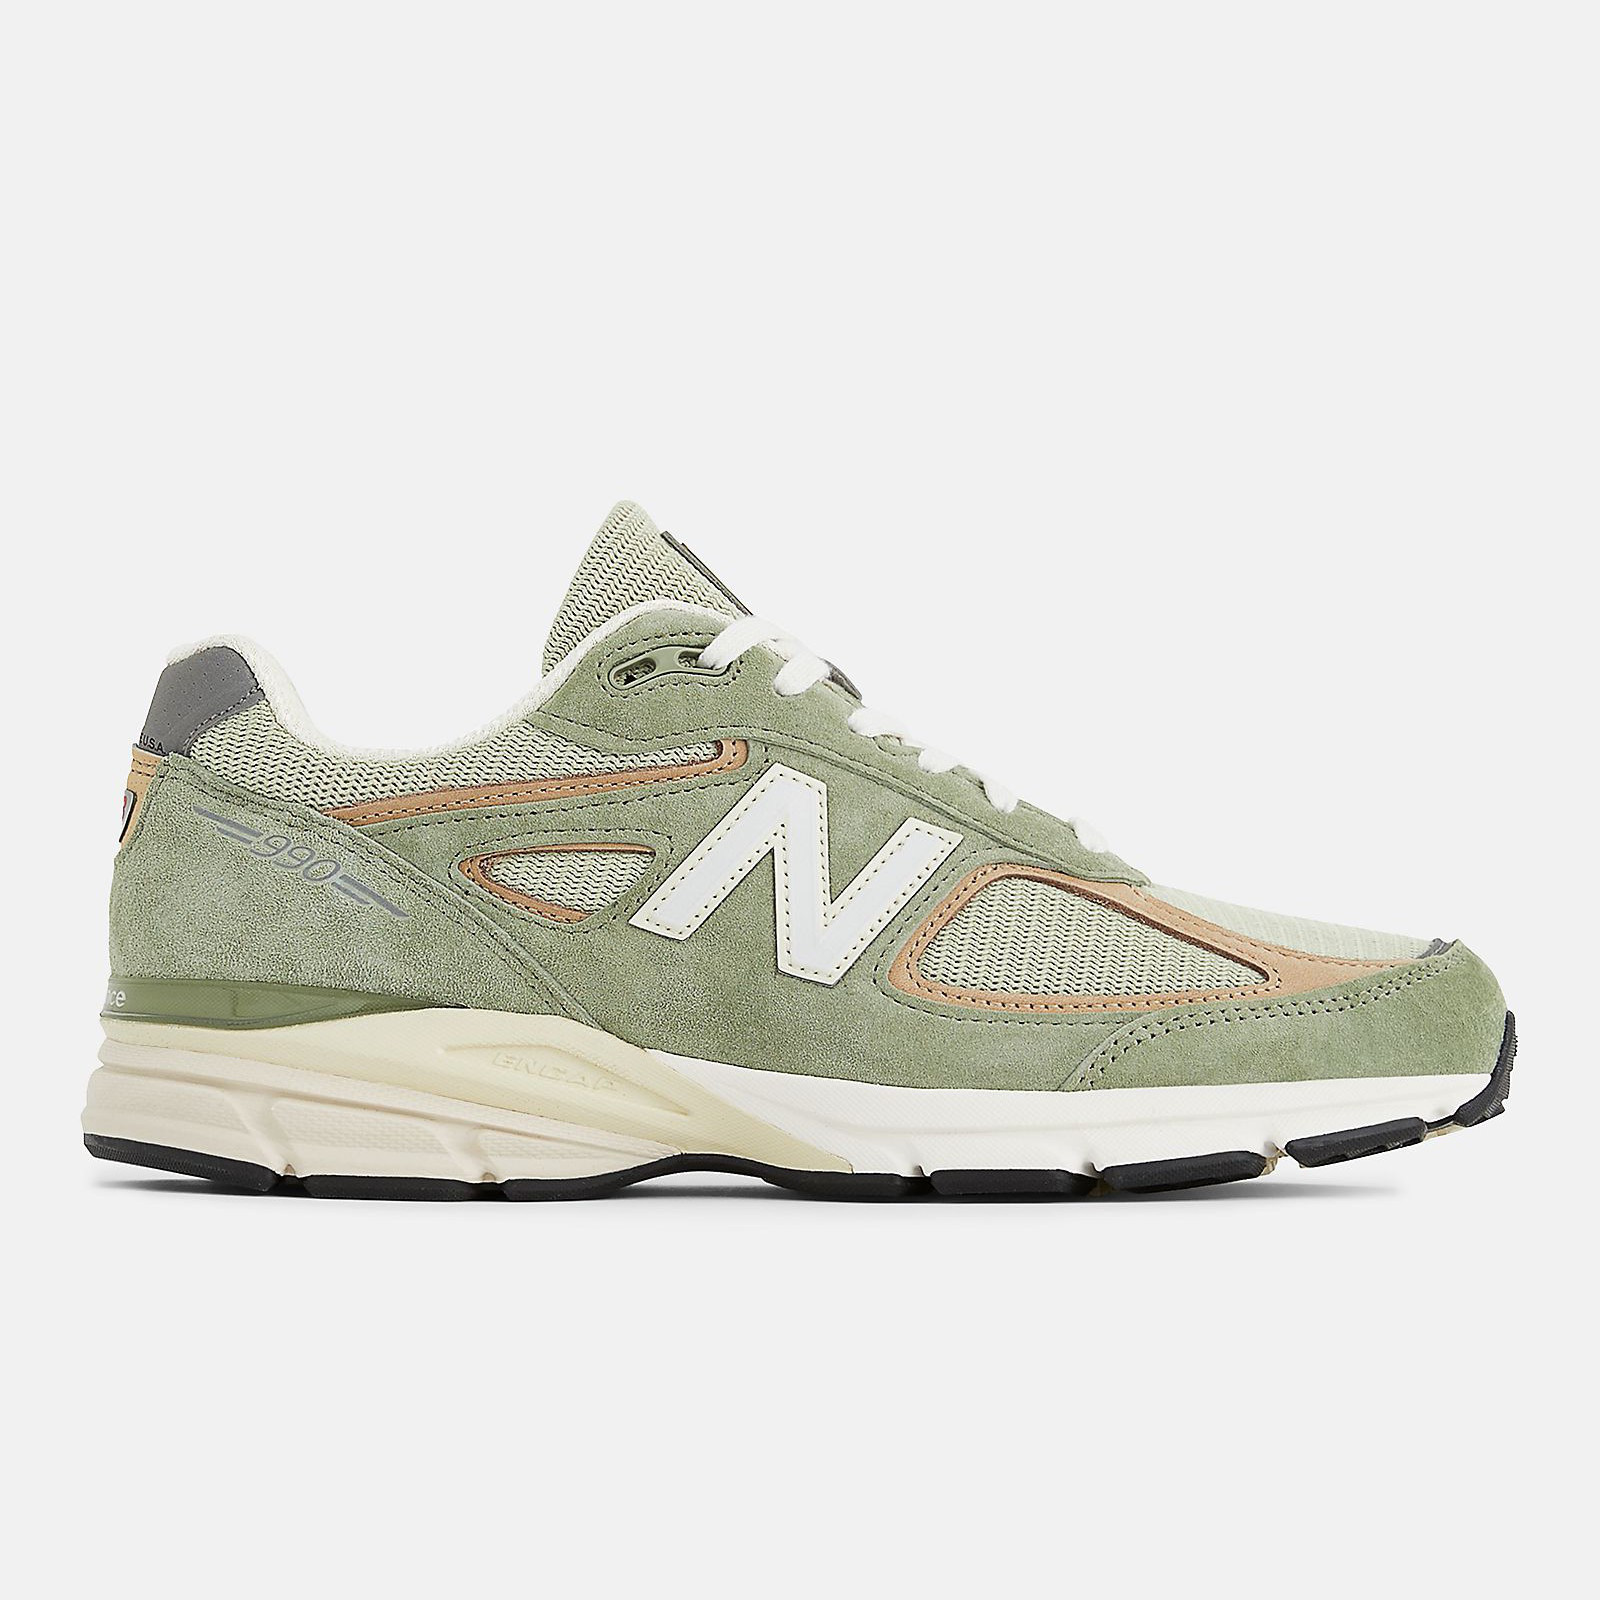 New Balance U990GT4
Made in USA
Olive / Incense